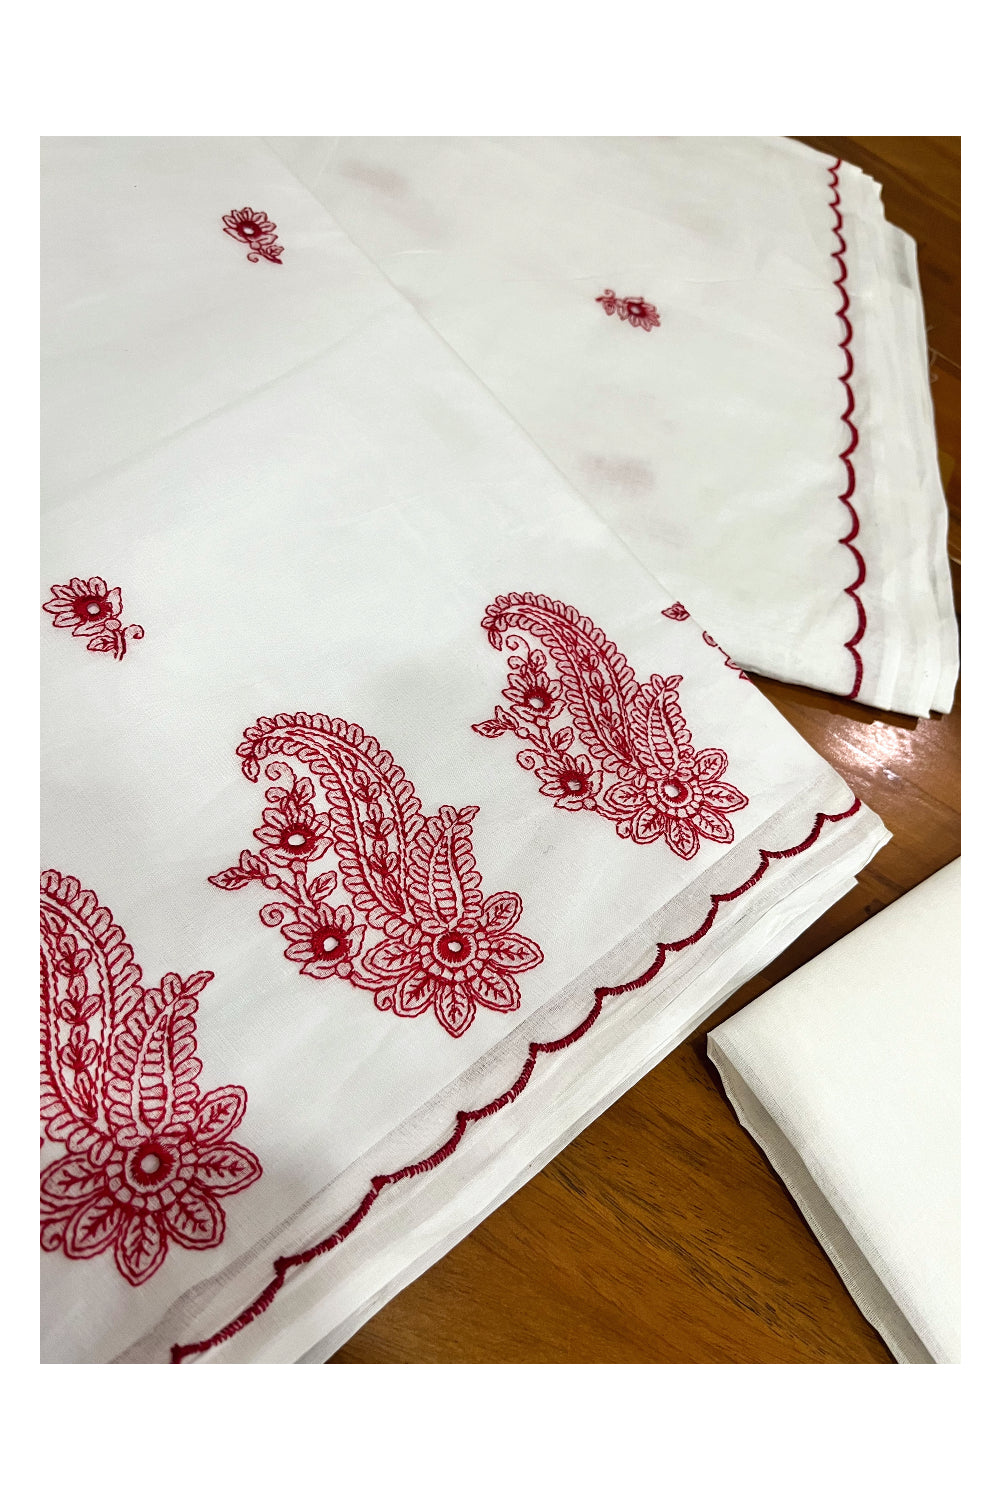 Southloom Cotton Pure White Saree with Red Woven Works on Body (2023 Christmas Special Saree)